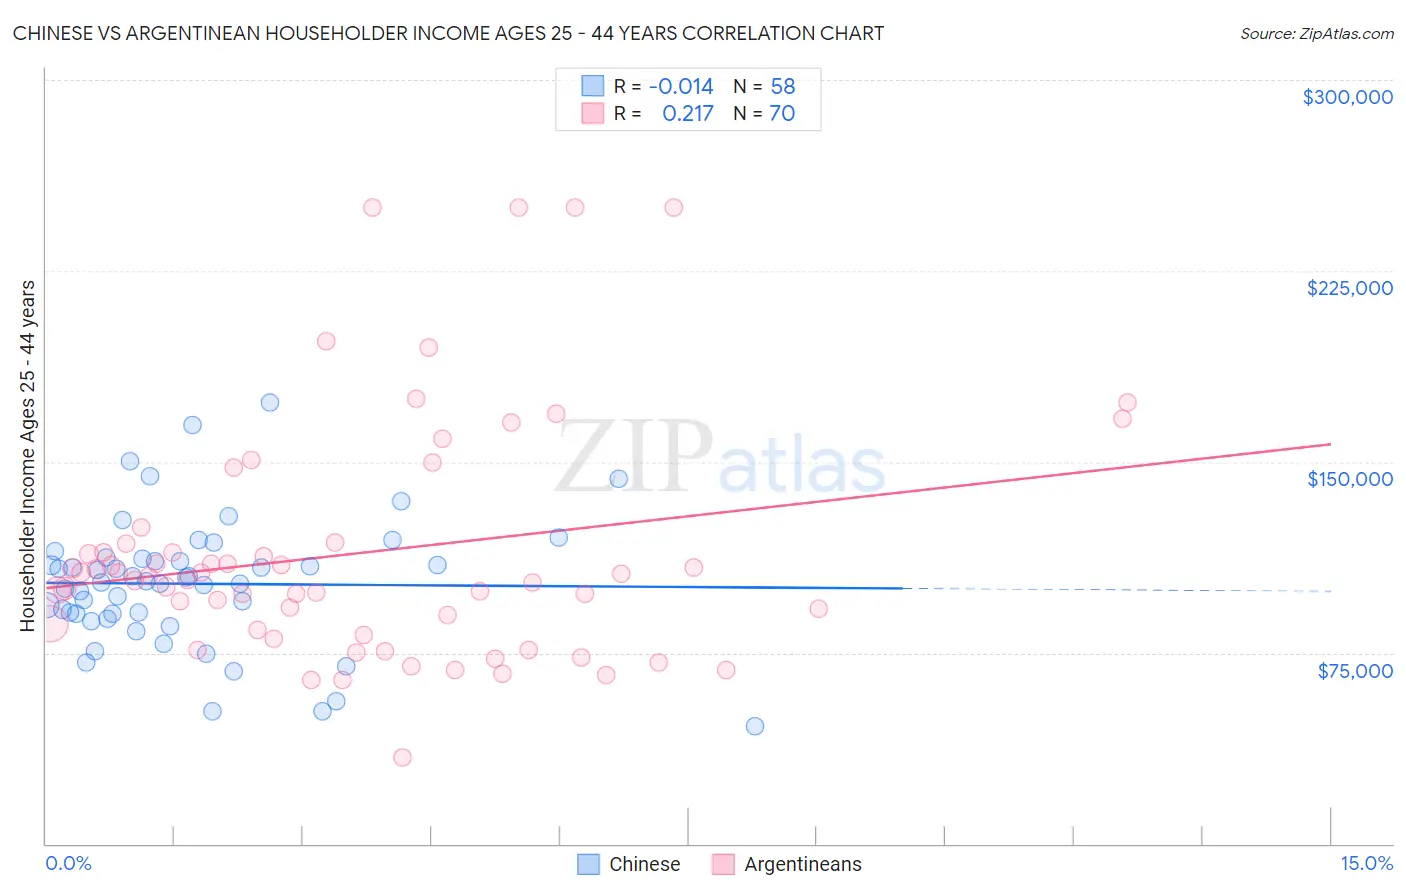 Chinese vs Argentinean Householder Income Ages 25 - 44 years